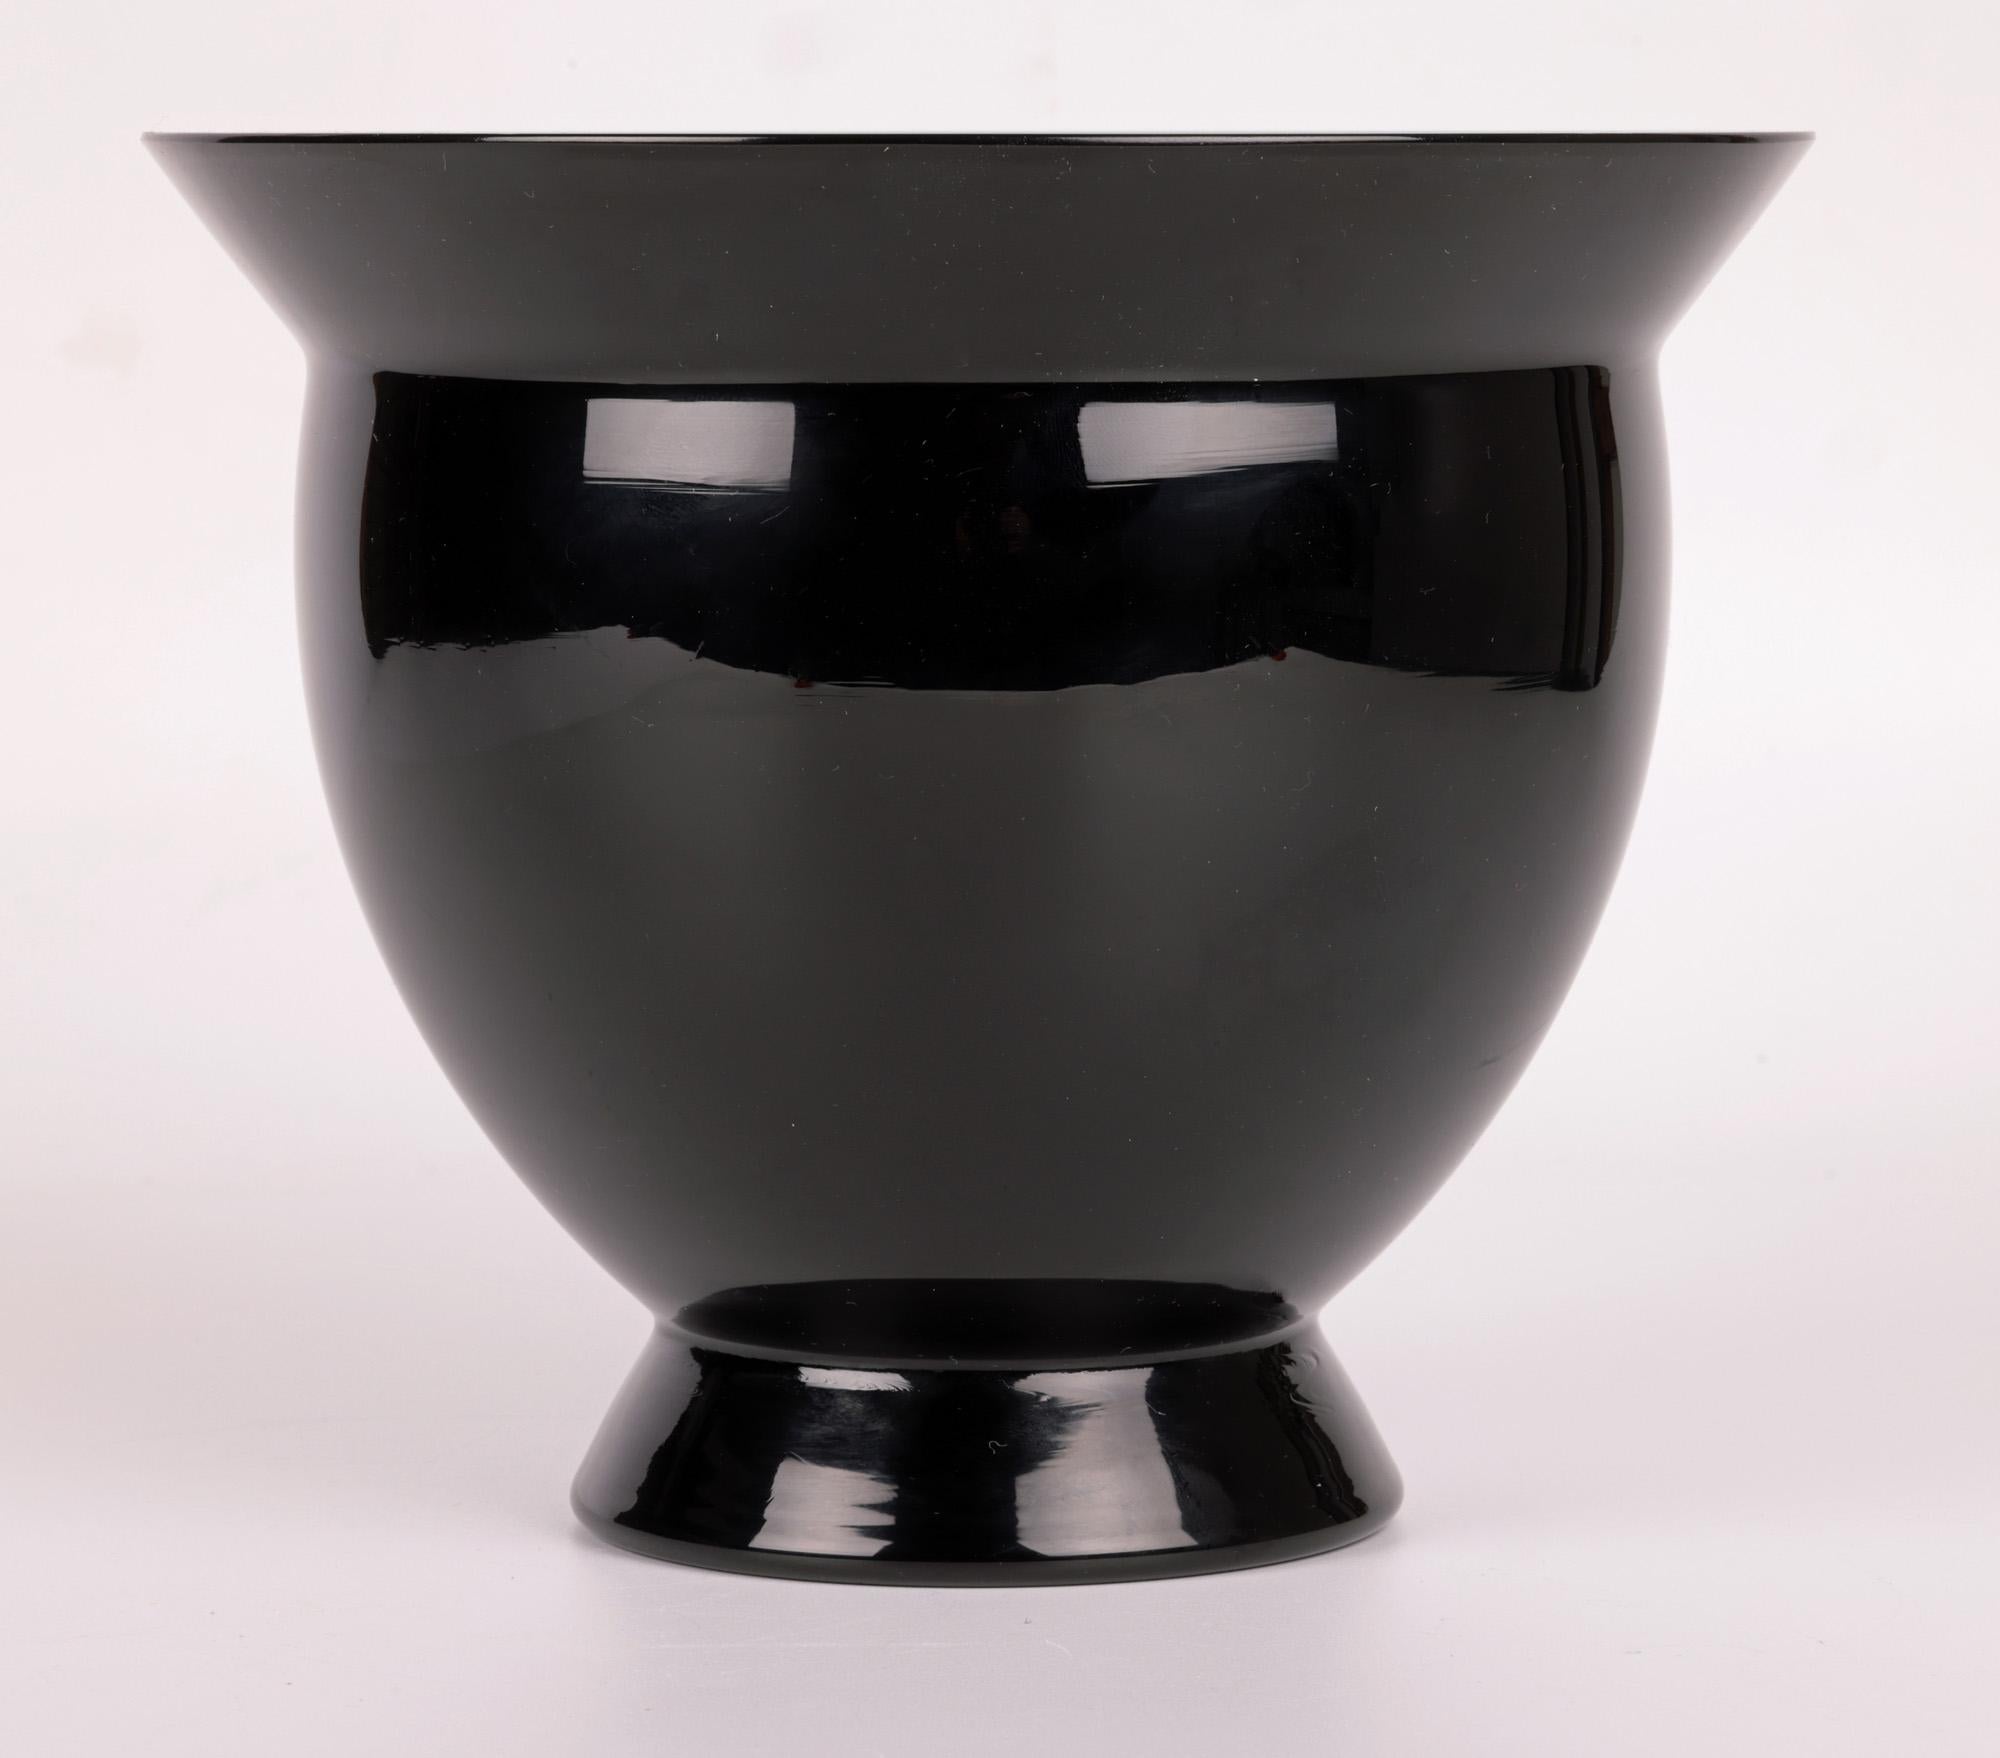 A very stylish and beautifully hand-made Venetian Murano art glass vase in green and white glass cased in a mirror black glass finish produced by renowned glass makers Venini and designed by renowned glass designer Allessandro Mendini (Italian,